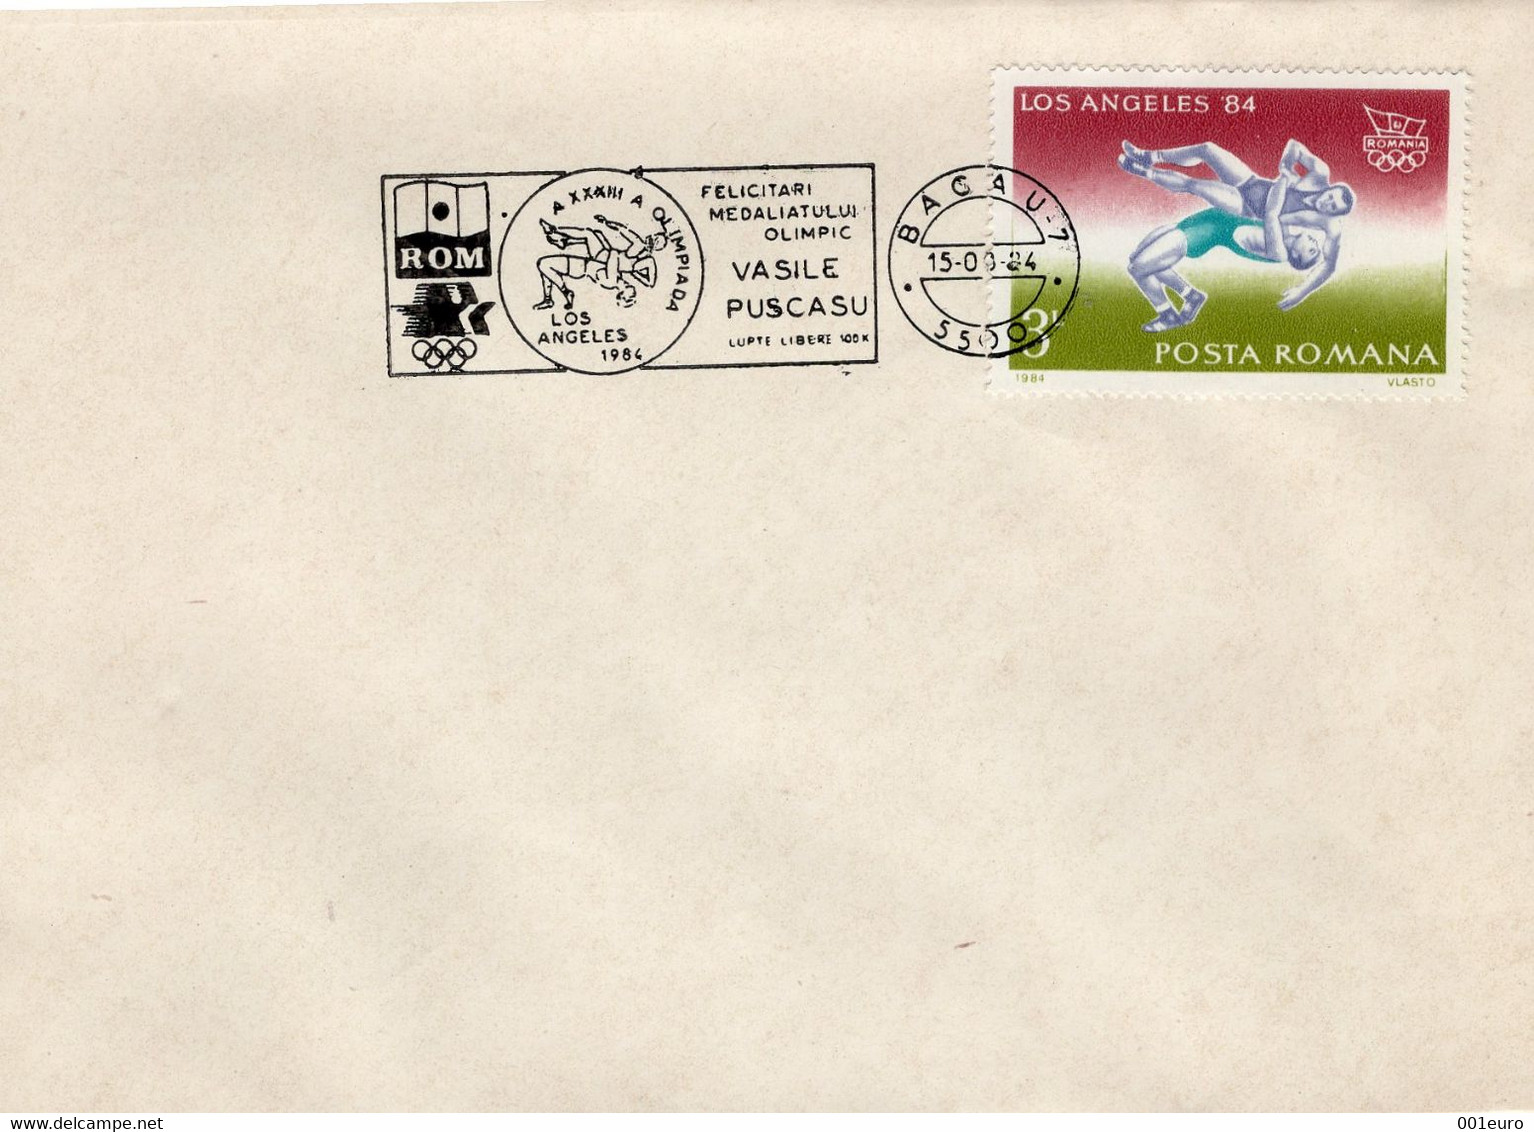 ROMANIA 1984: LOS ANGELES OLYMPIC MEDAL - WRESTLING, Illustrated Postmark On Cover  - Registered Shipping! - Poststempel (Marcophilie)